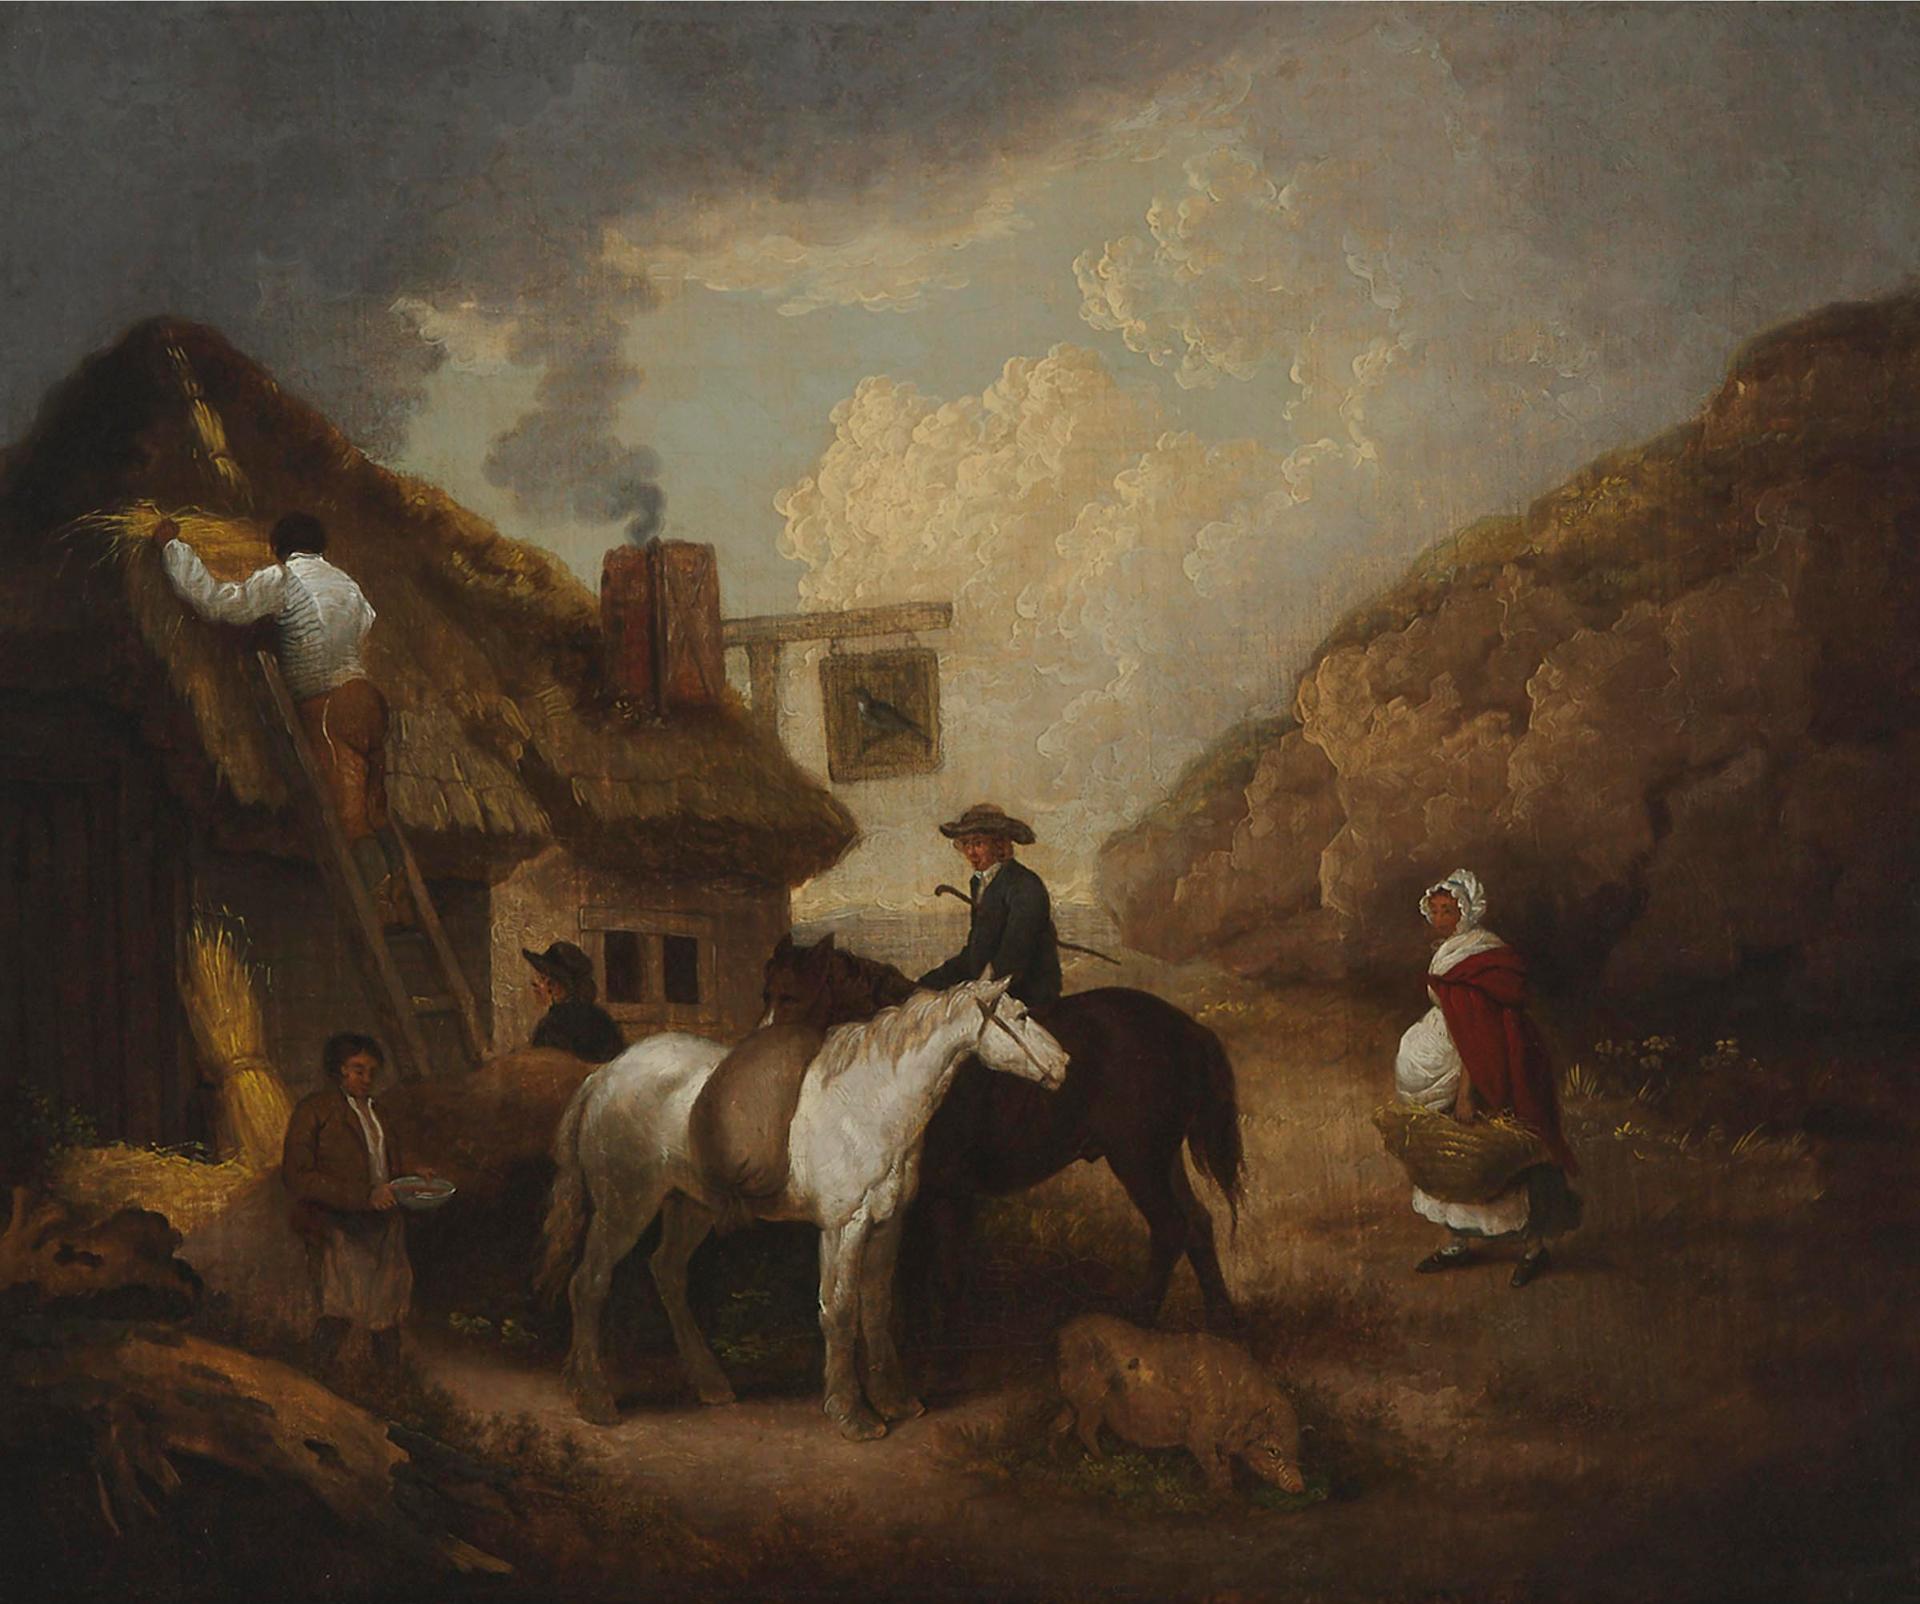 Follower of George Morland (1763-1804) - The Thatcher